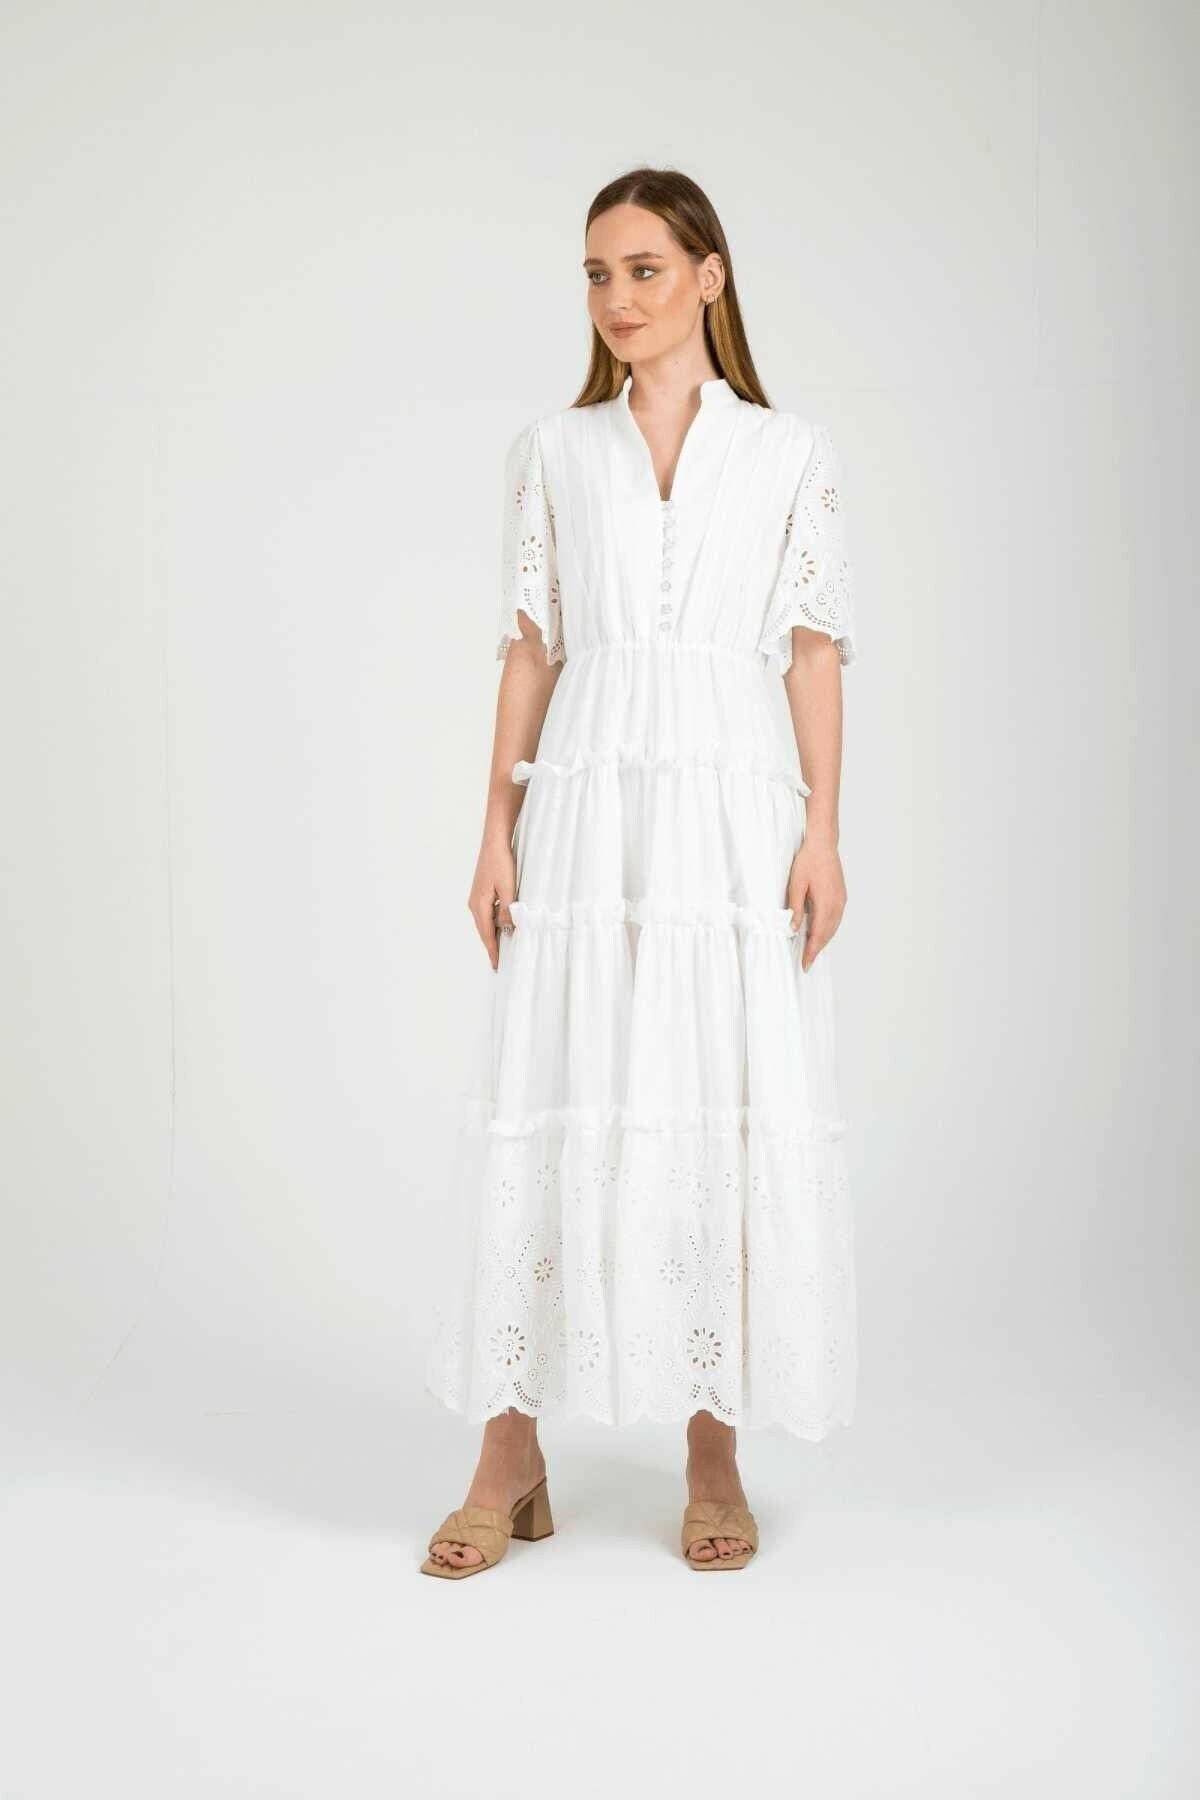 The Iris dress is a must-have for your next special event  By Baano   